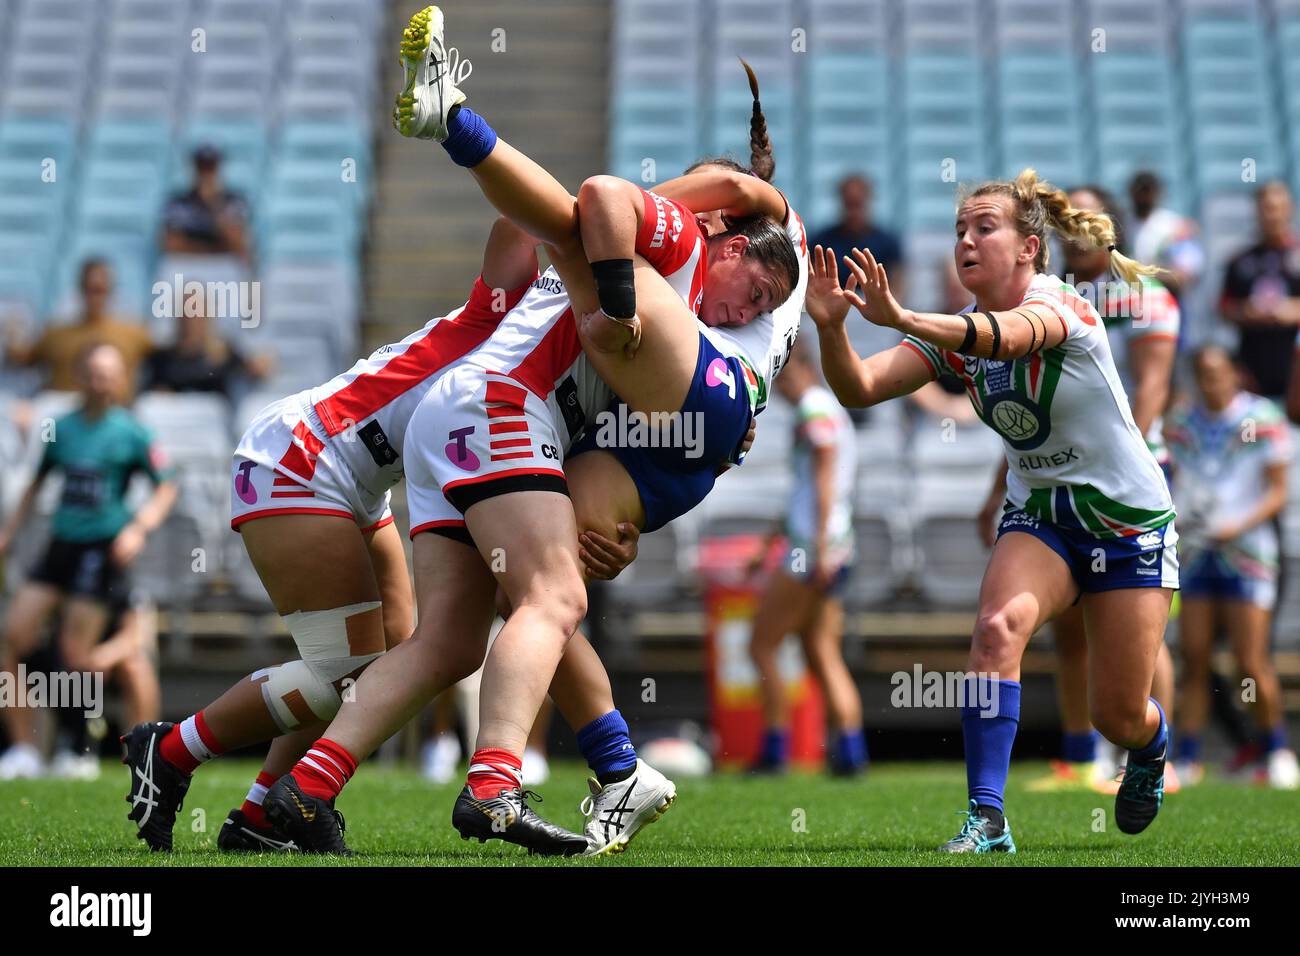 Samantha Economos of the Warriors is tackled by Christine Pauli of the  Dragons during the NRLW match between the St. George Illawarra Dragons and  the New Zealand Warriors at ANZ Stadium in